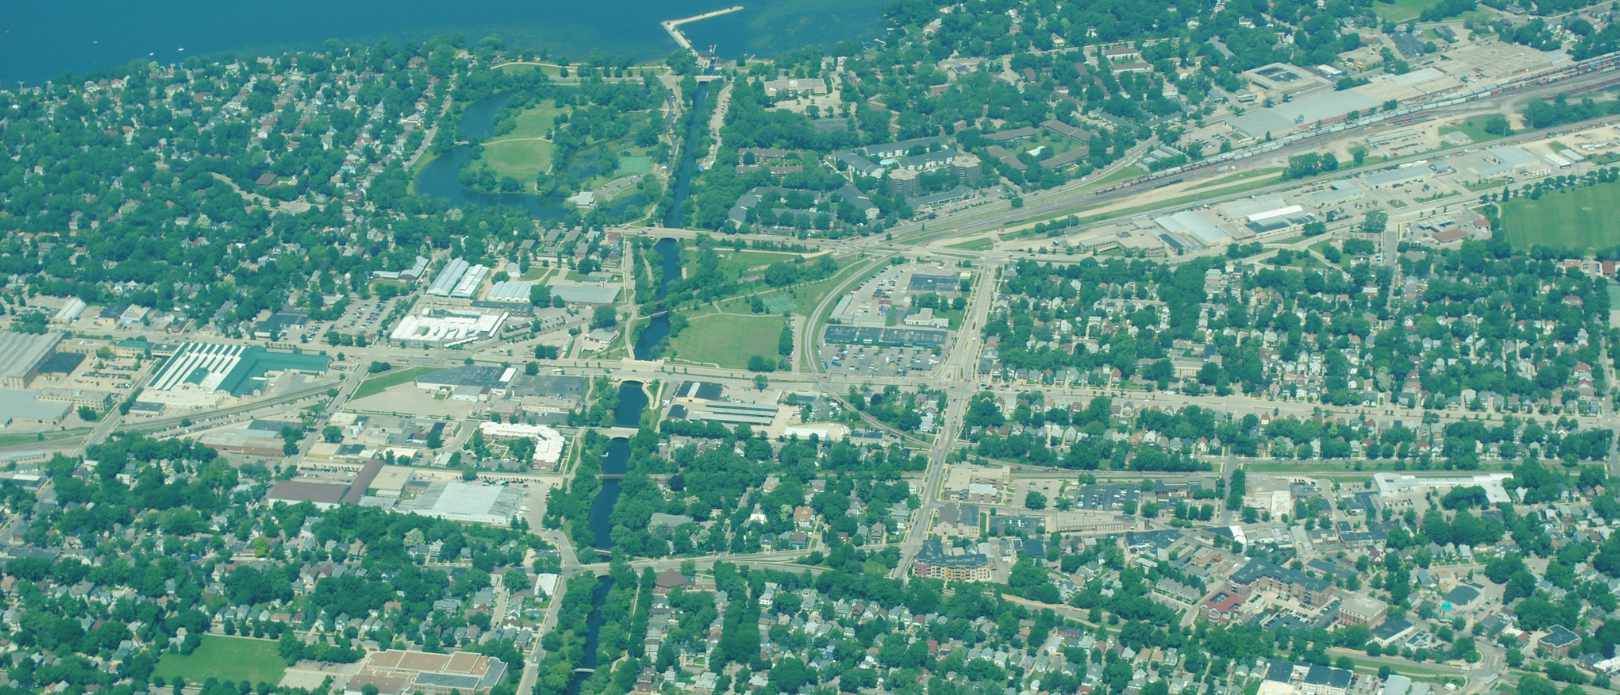 Air view picture of the Yahara River running through Madison's Isthmus.